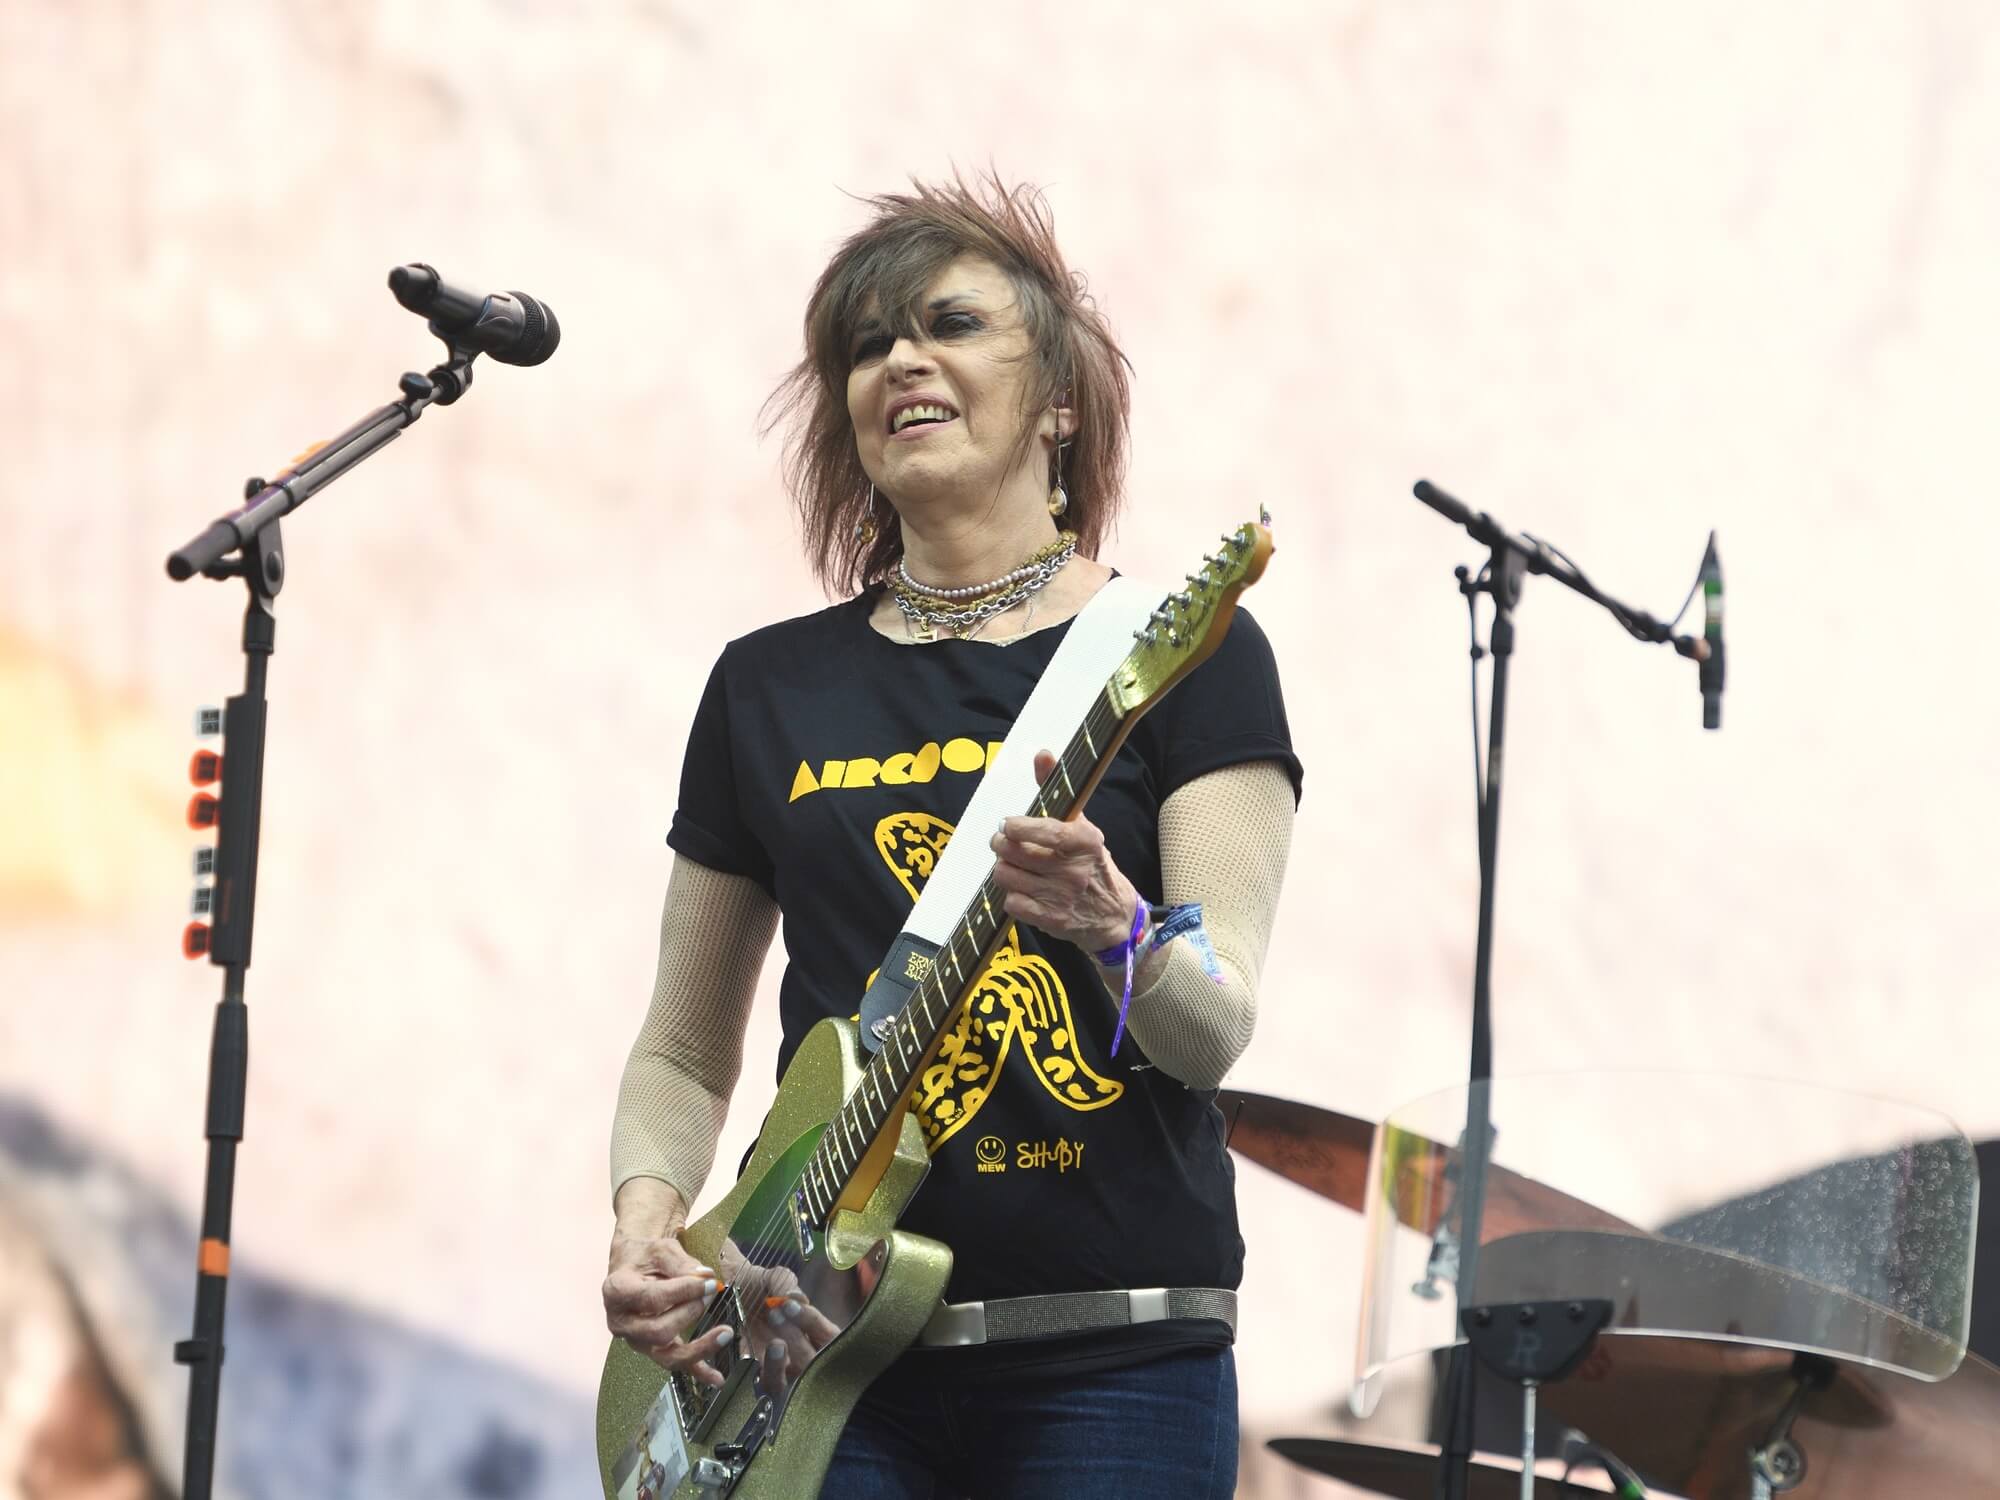 Chrissie Hynde performing on stage